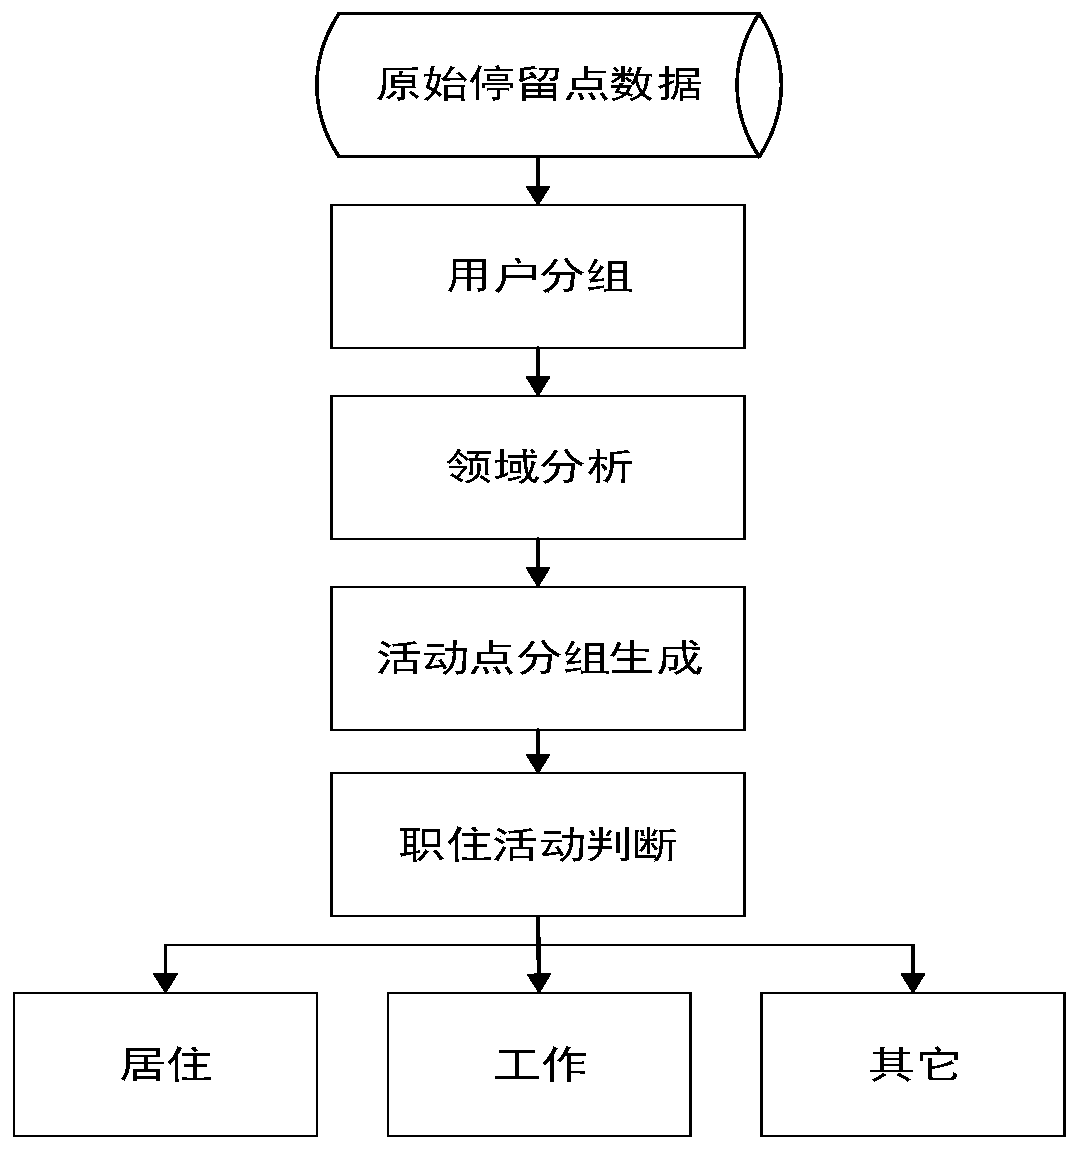 User activity space recognition method based on mobile phone signaling